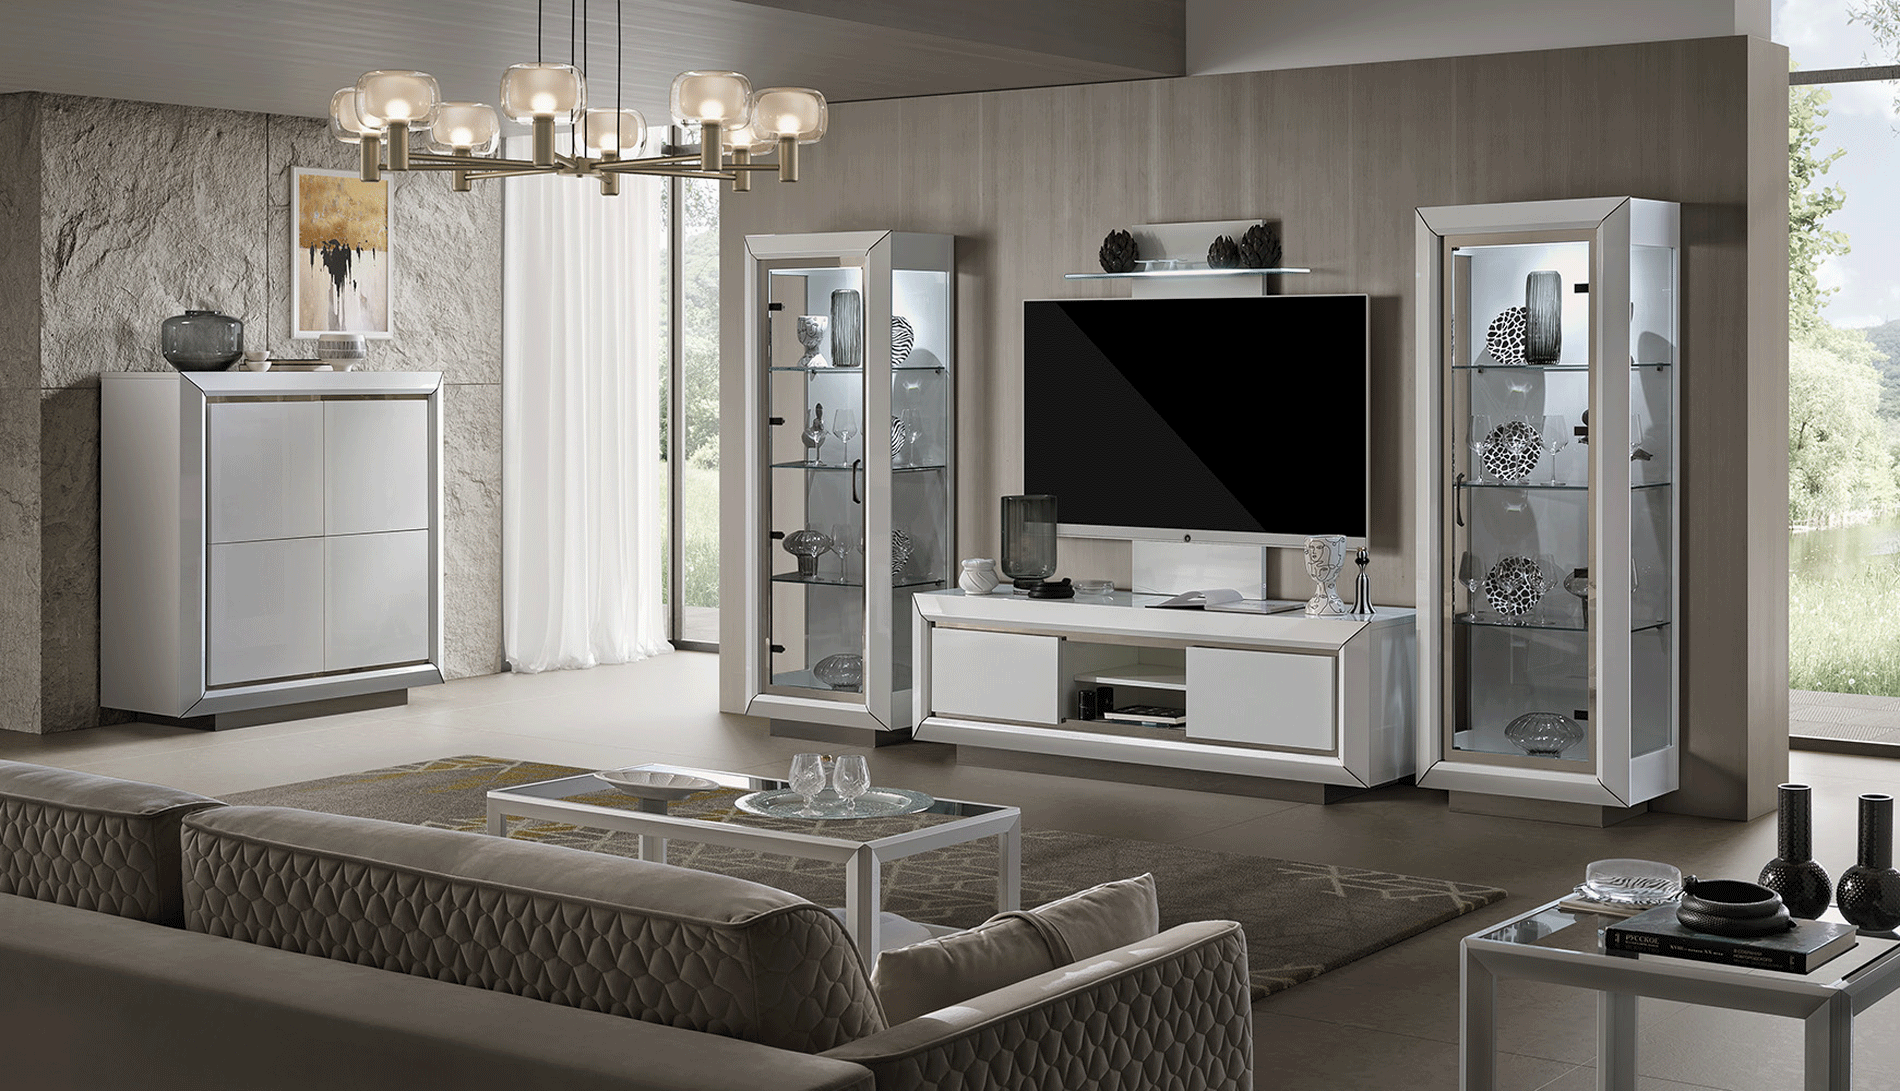 Living Room Furniture Coffee and End Tables Elite WHITE Entertainment center Additional items